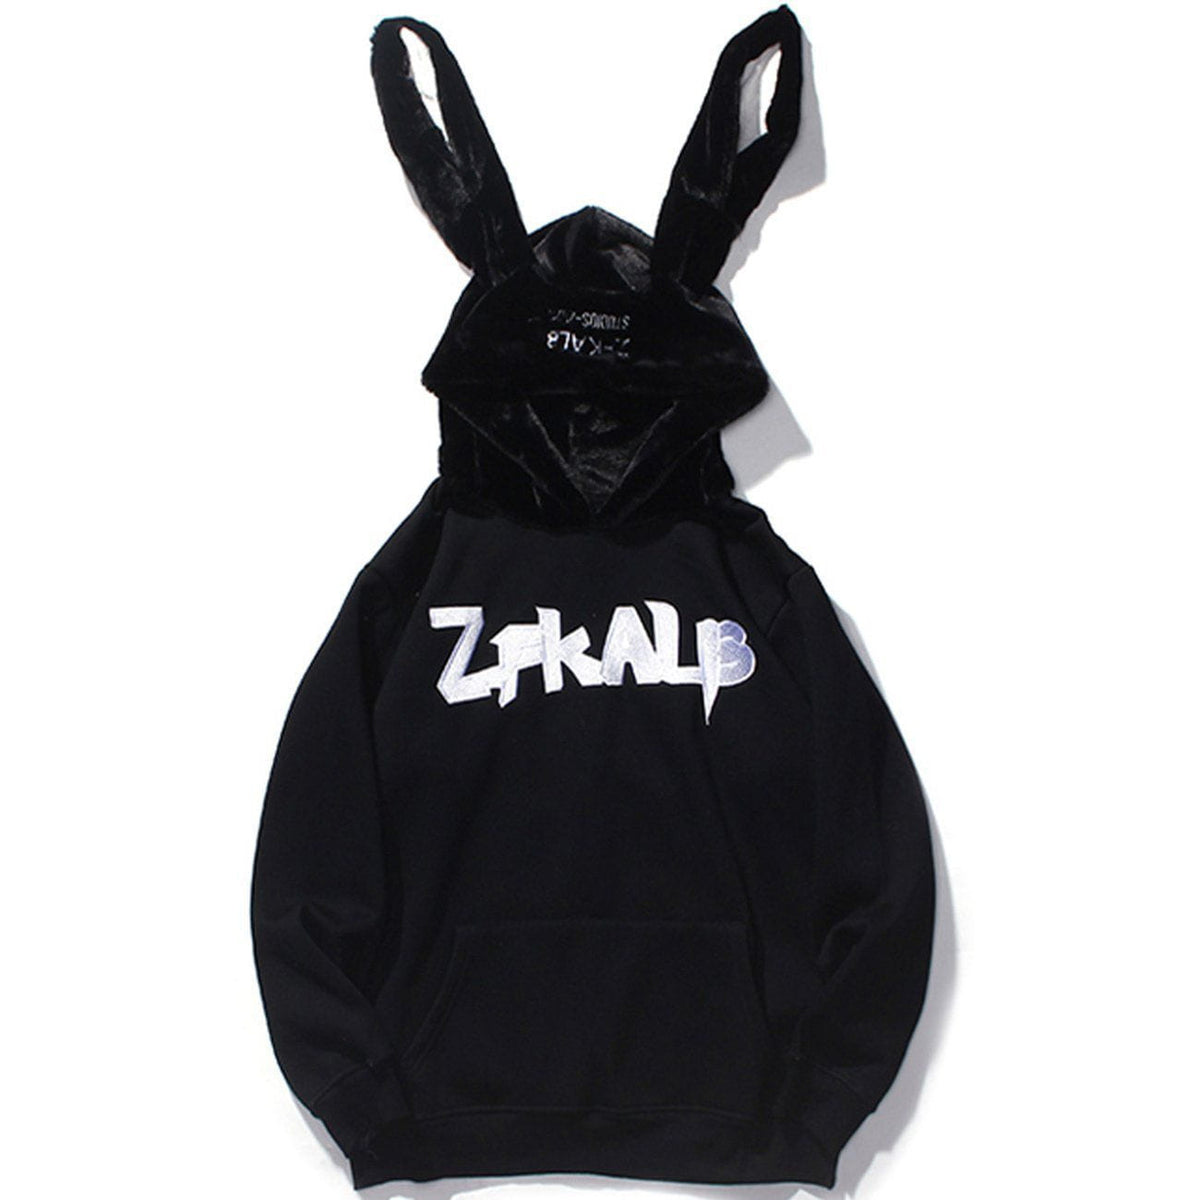 LUXENFY™ - Monogram Embroidery Rabbit Ears Hoodie luxenfy.com